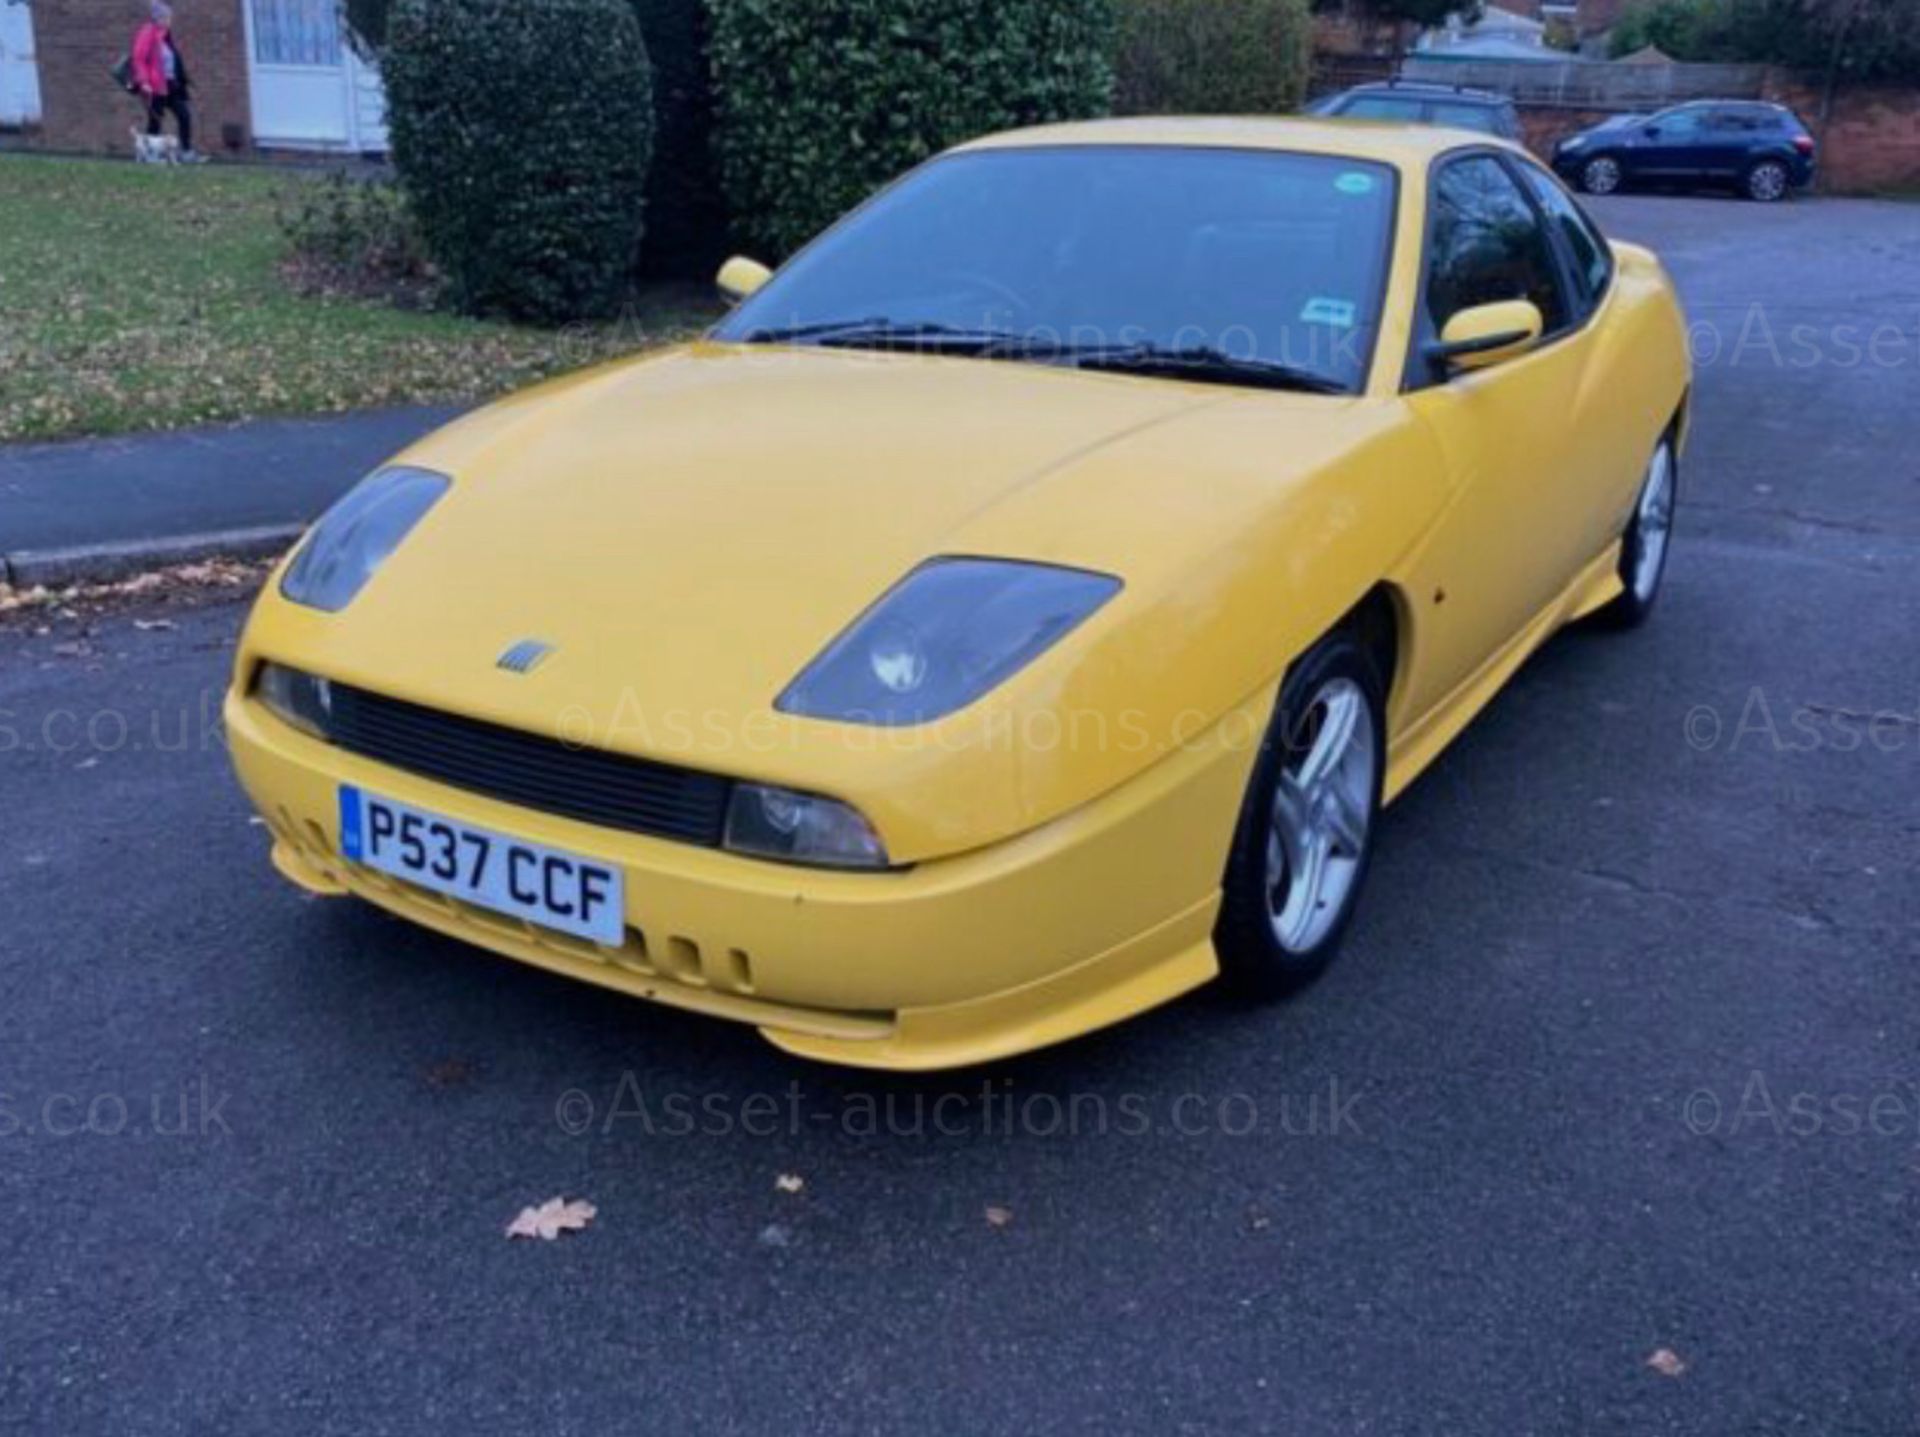 1996 FIAT COUPE 20V TURBO YELLOW SALOON, 2.0 PETROL ENGINE, SHOWING 95K MILES *NO VAT* - Image 4 of 12